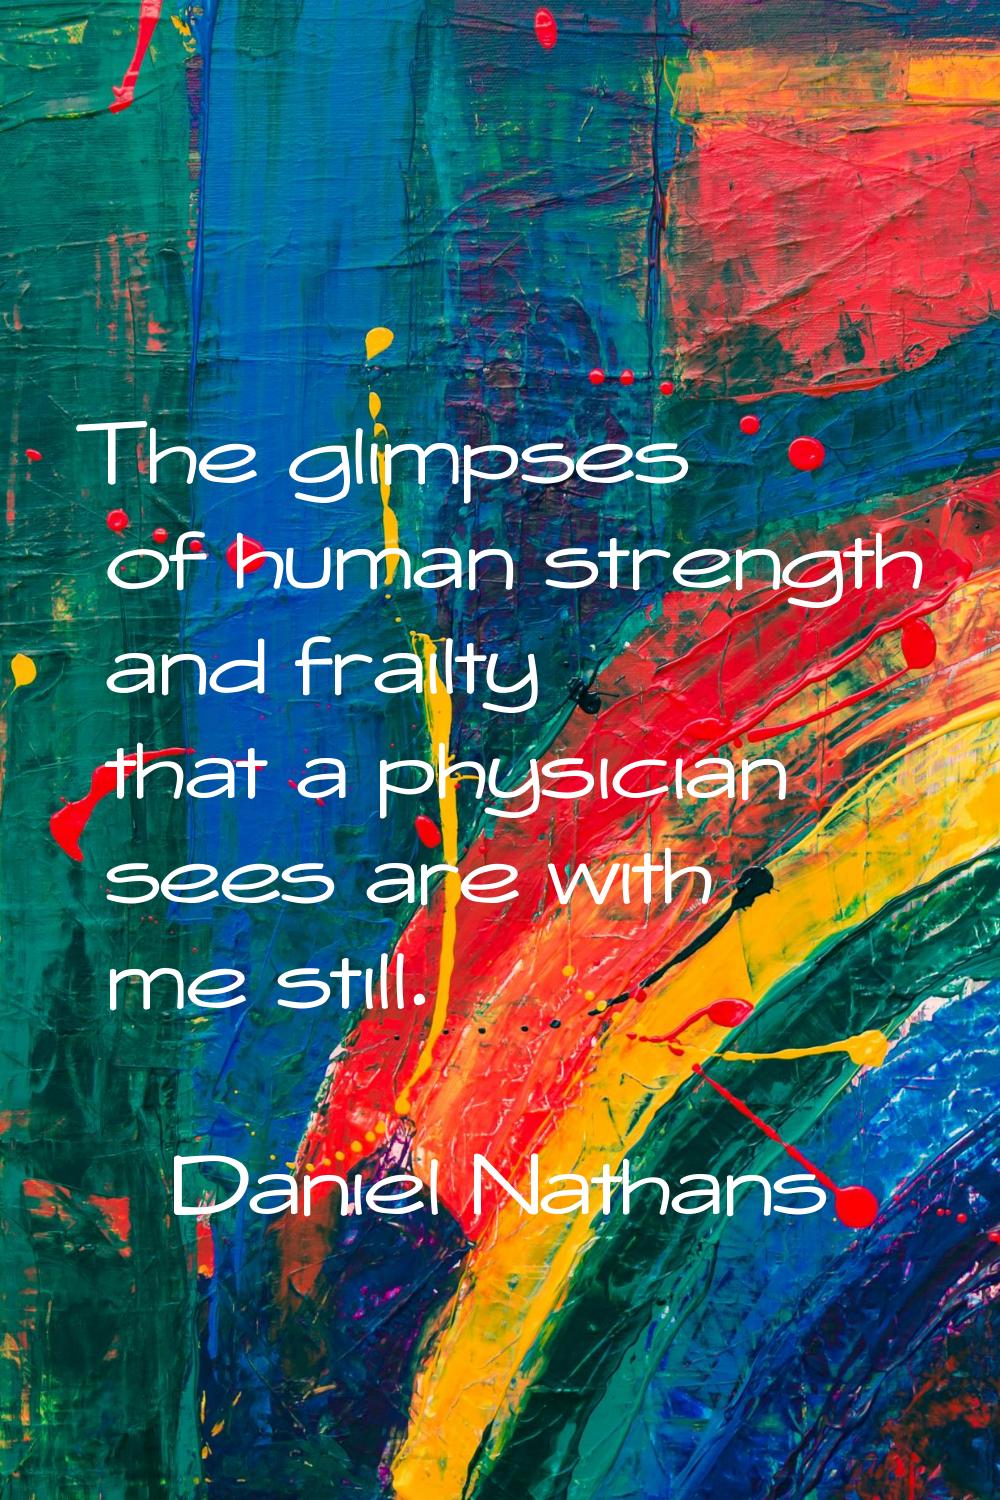 The glimpses of human strength and frailty that a physician sees are with me still.